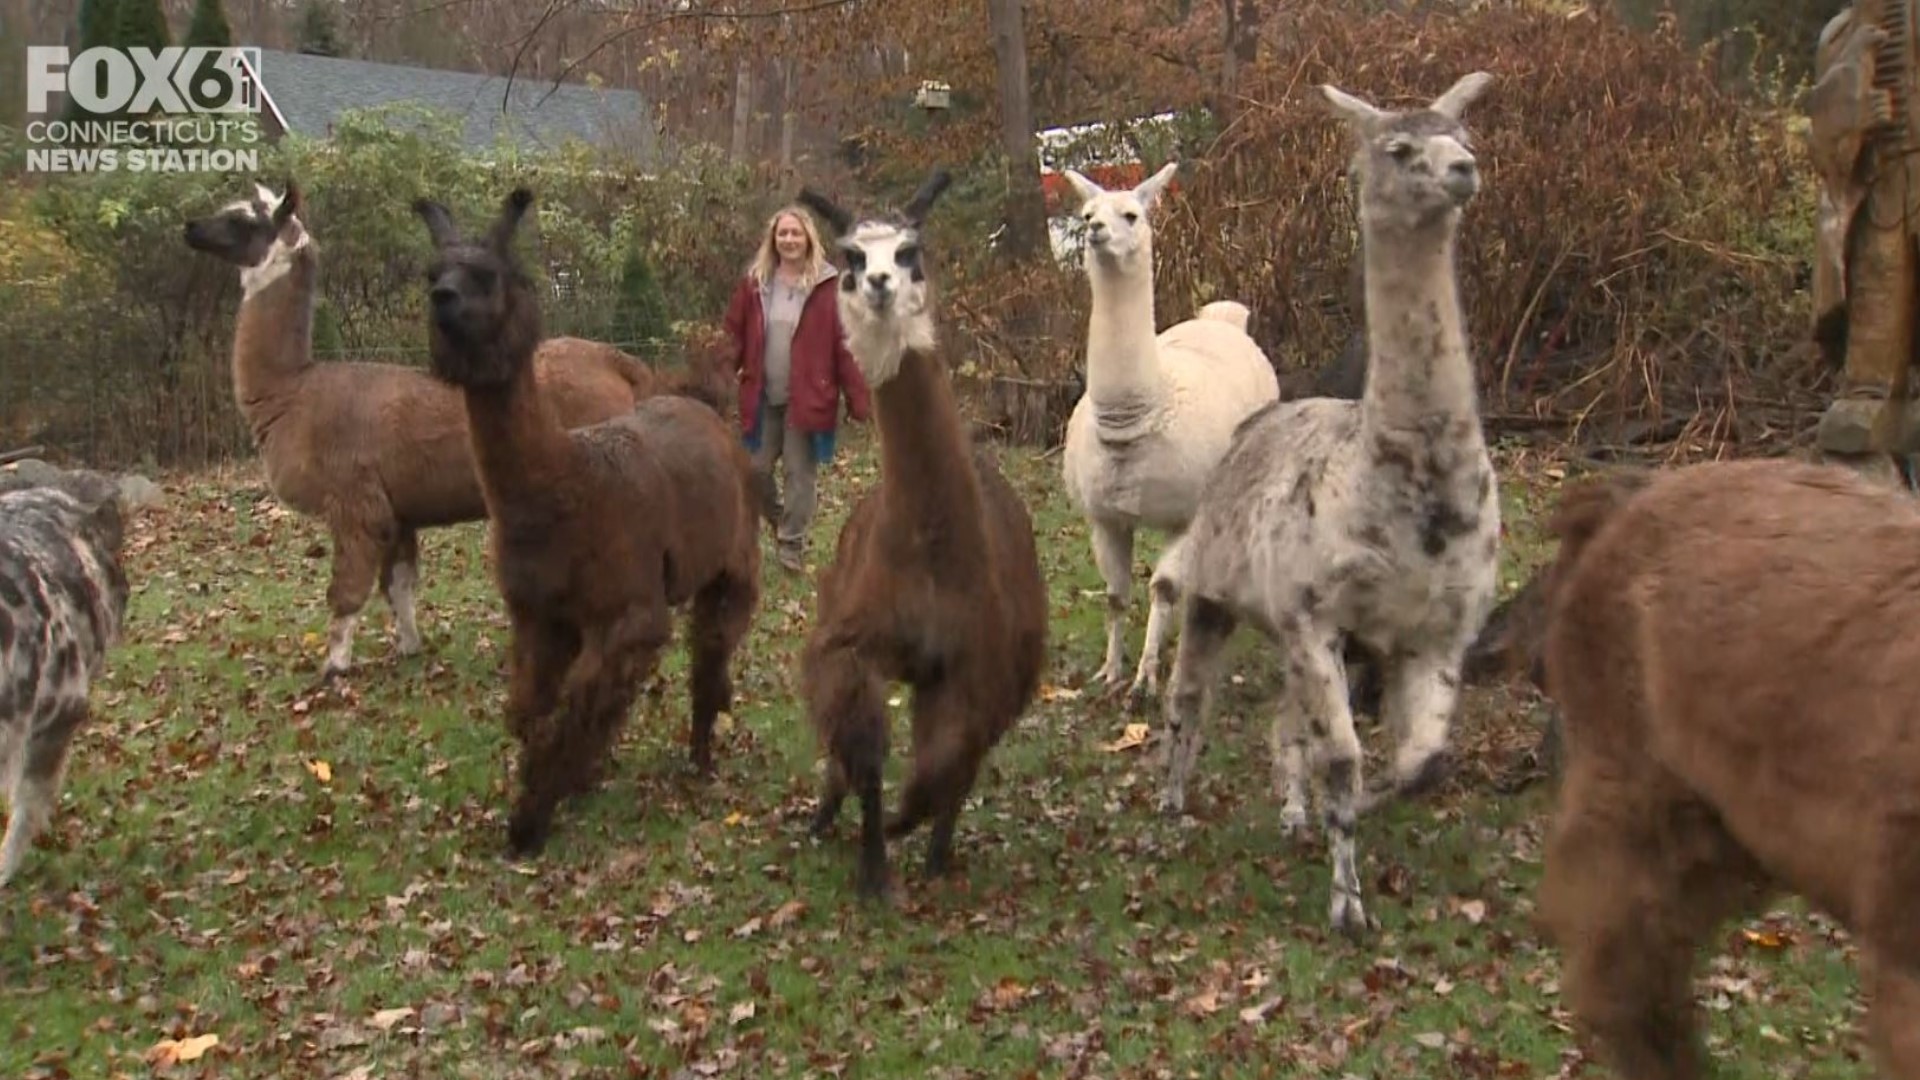 Llamas and goats roam the pastures in Sandy Hook. Also, explore their Native American tipi on property.